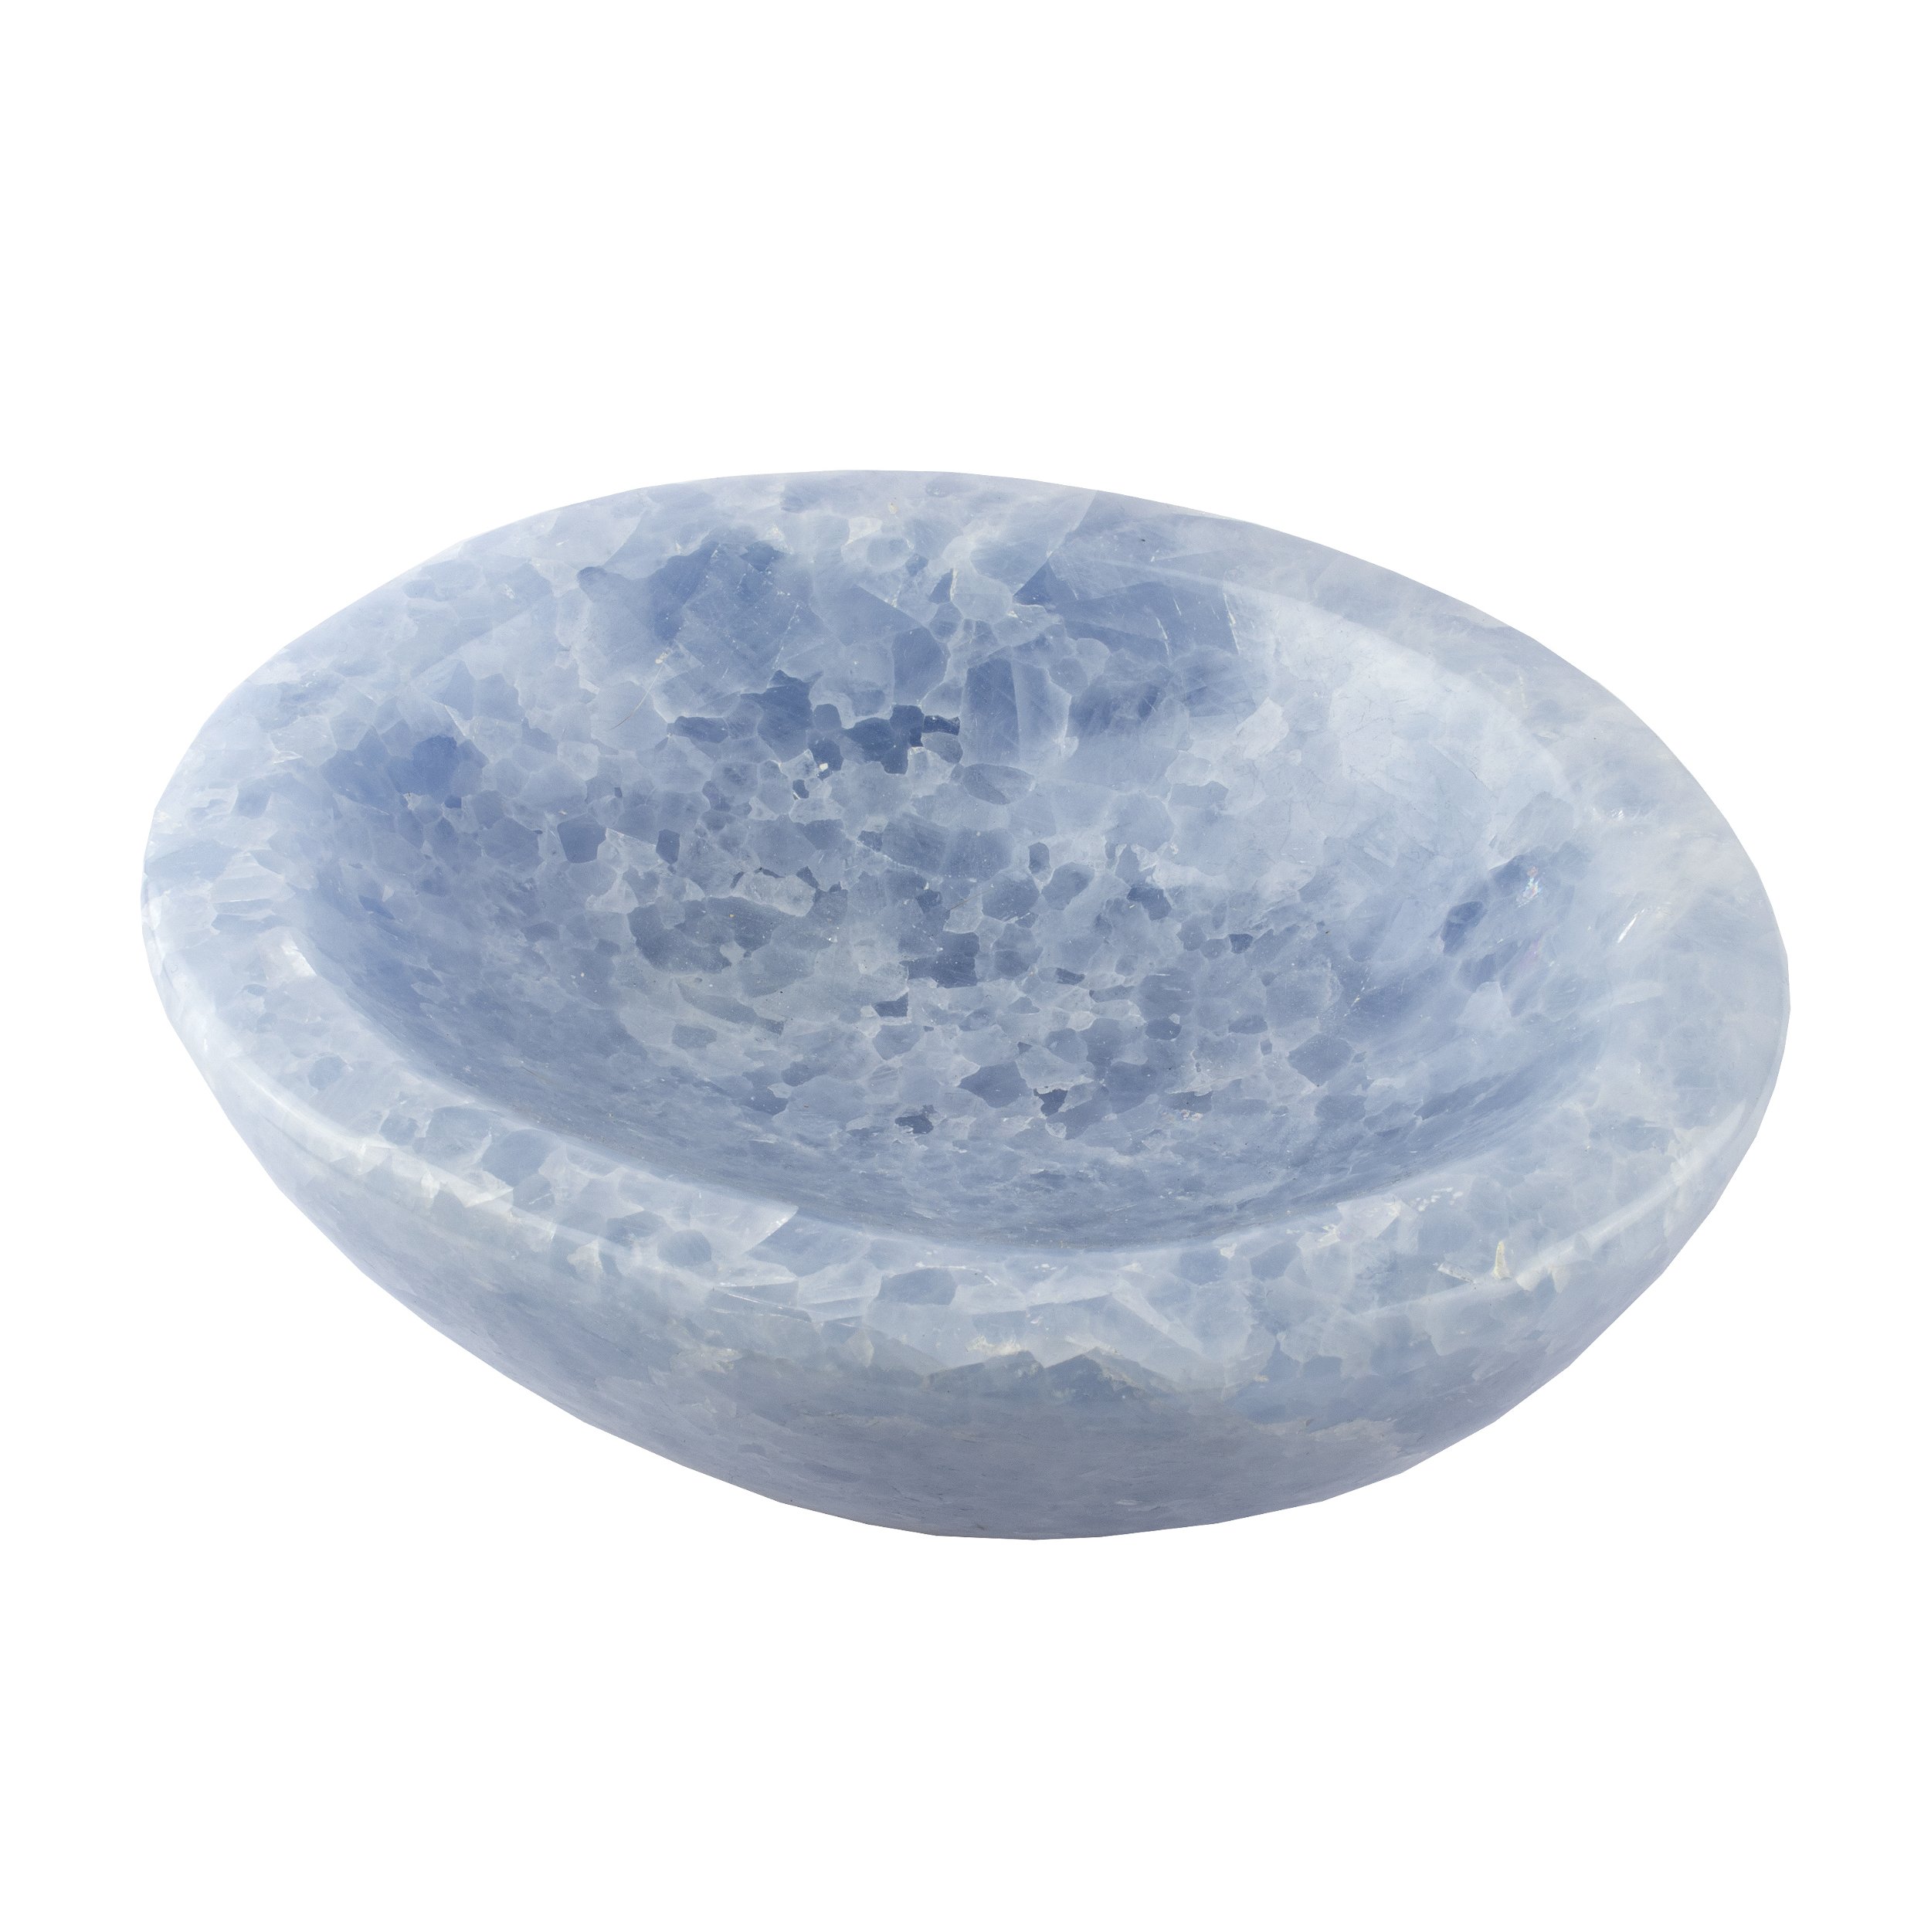 Blue Calcite Dish - Loose Crystals With A Mix Of Light And Dark Blue